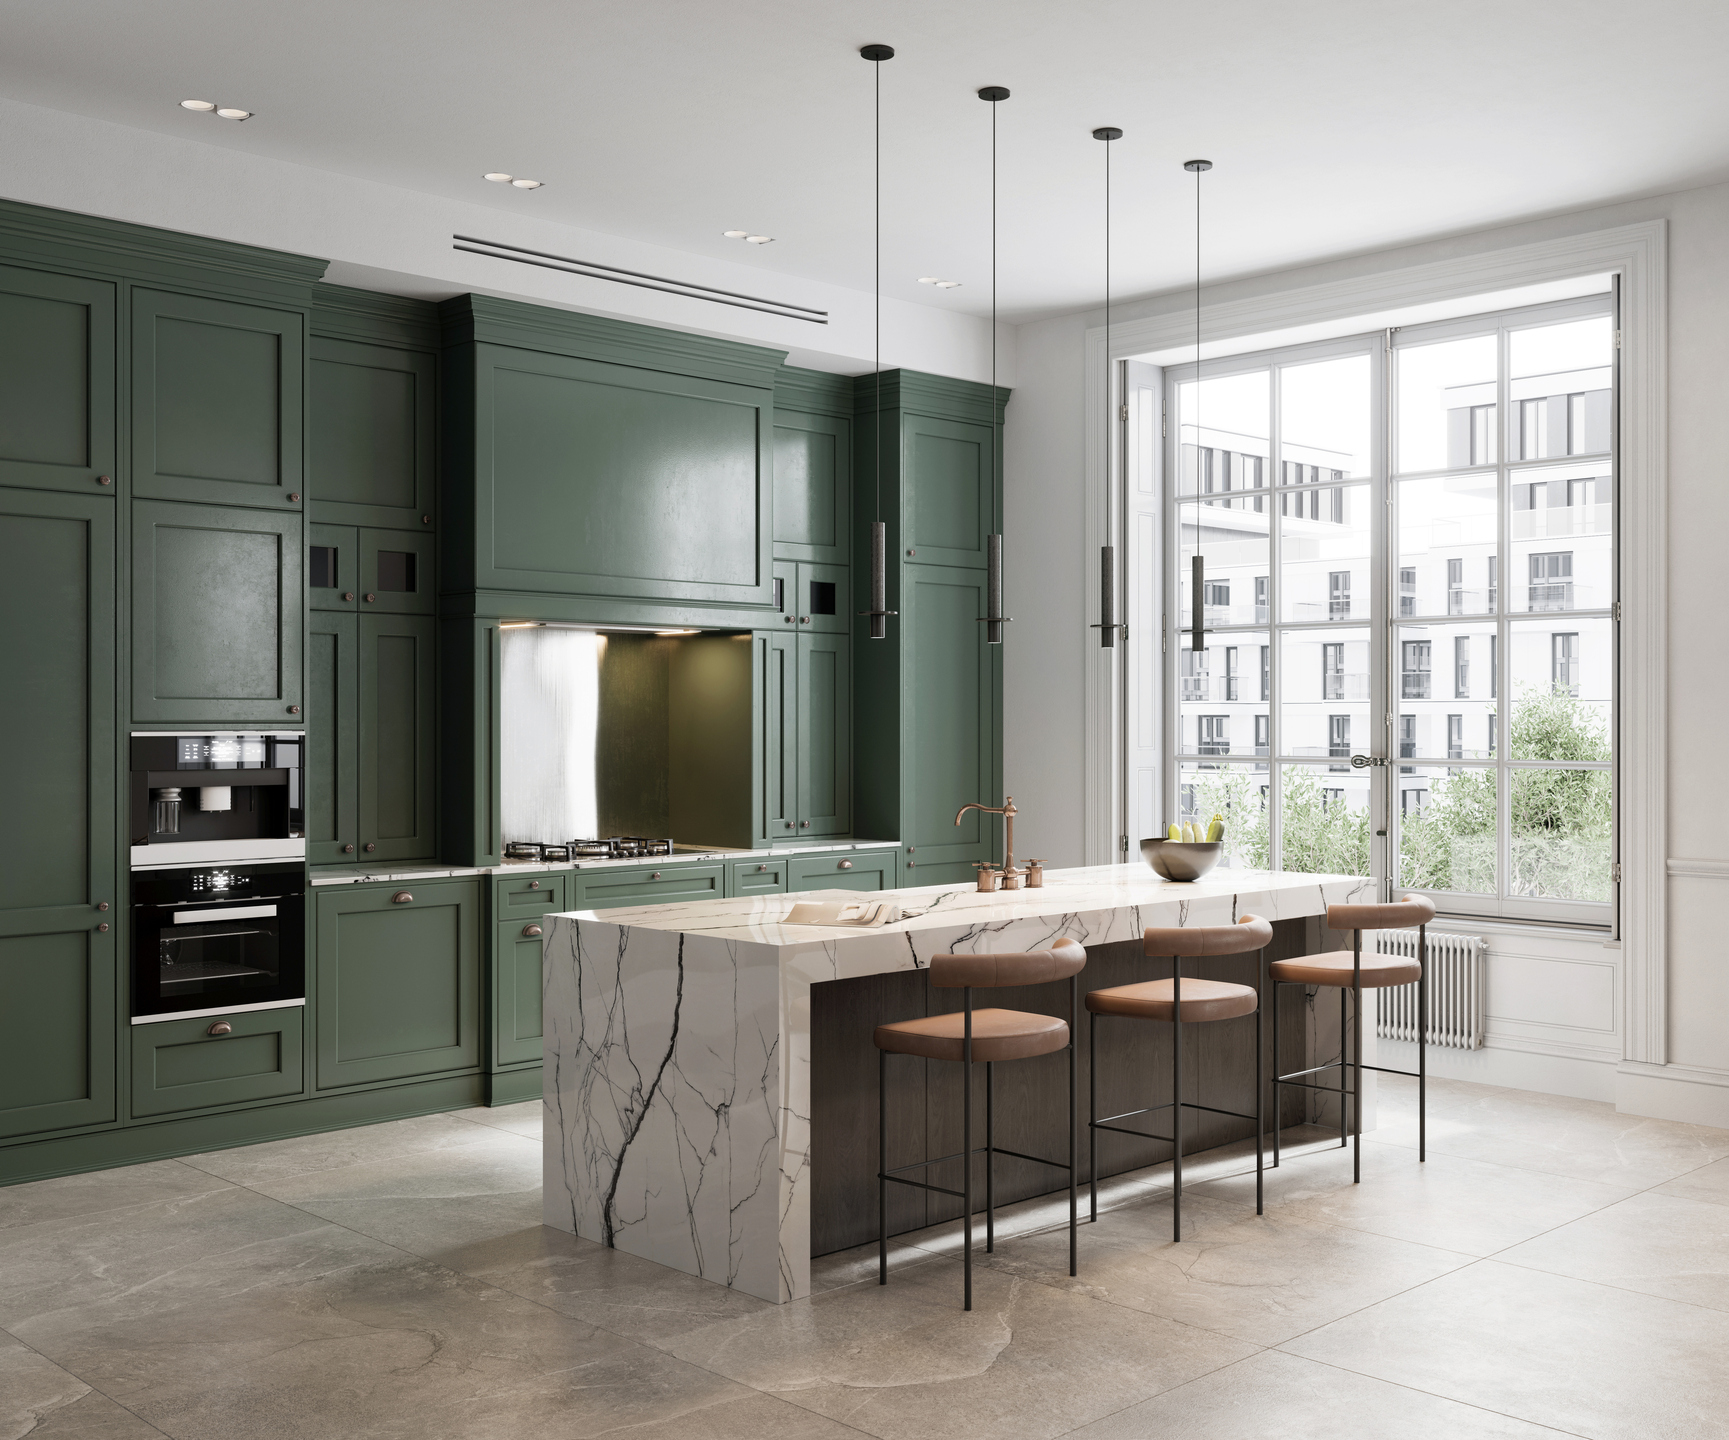 Use image: 3D-rendering-of-simple-kitchen-design-with-green-wall-1386951983_3460x2883 